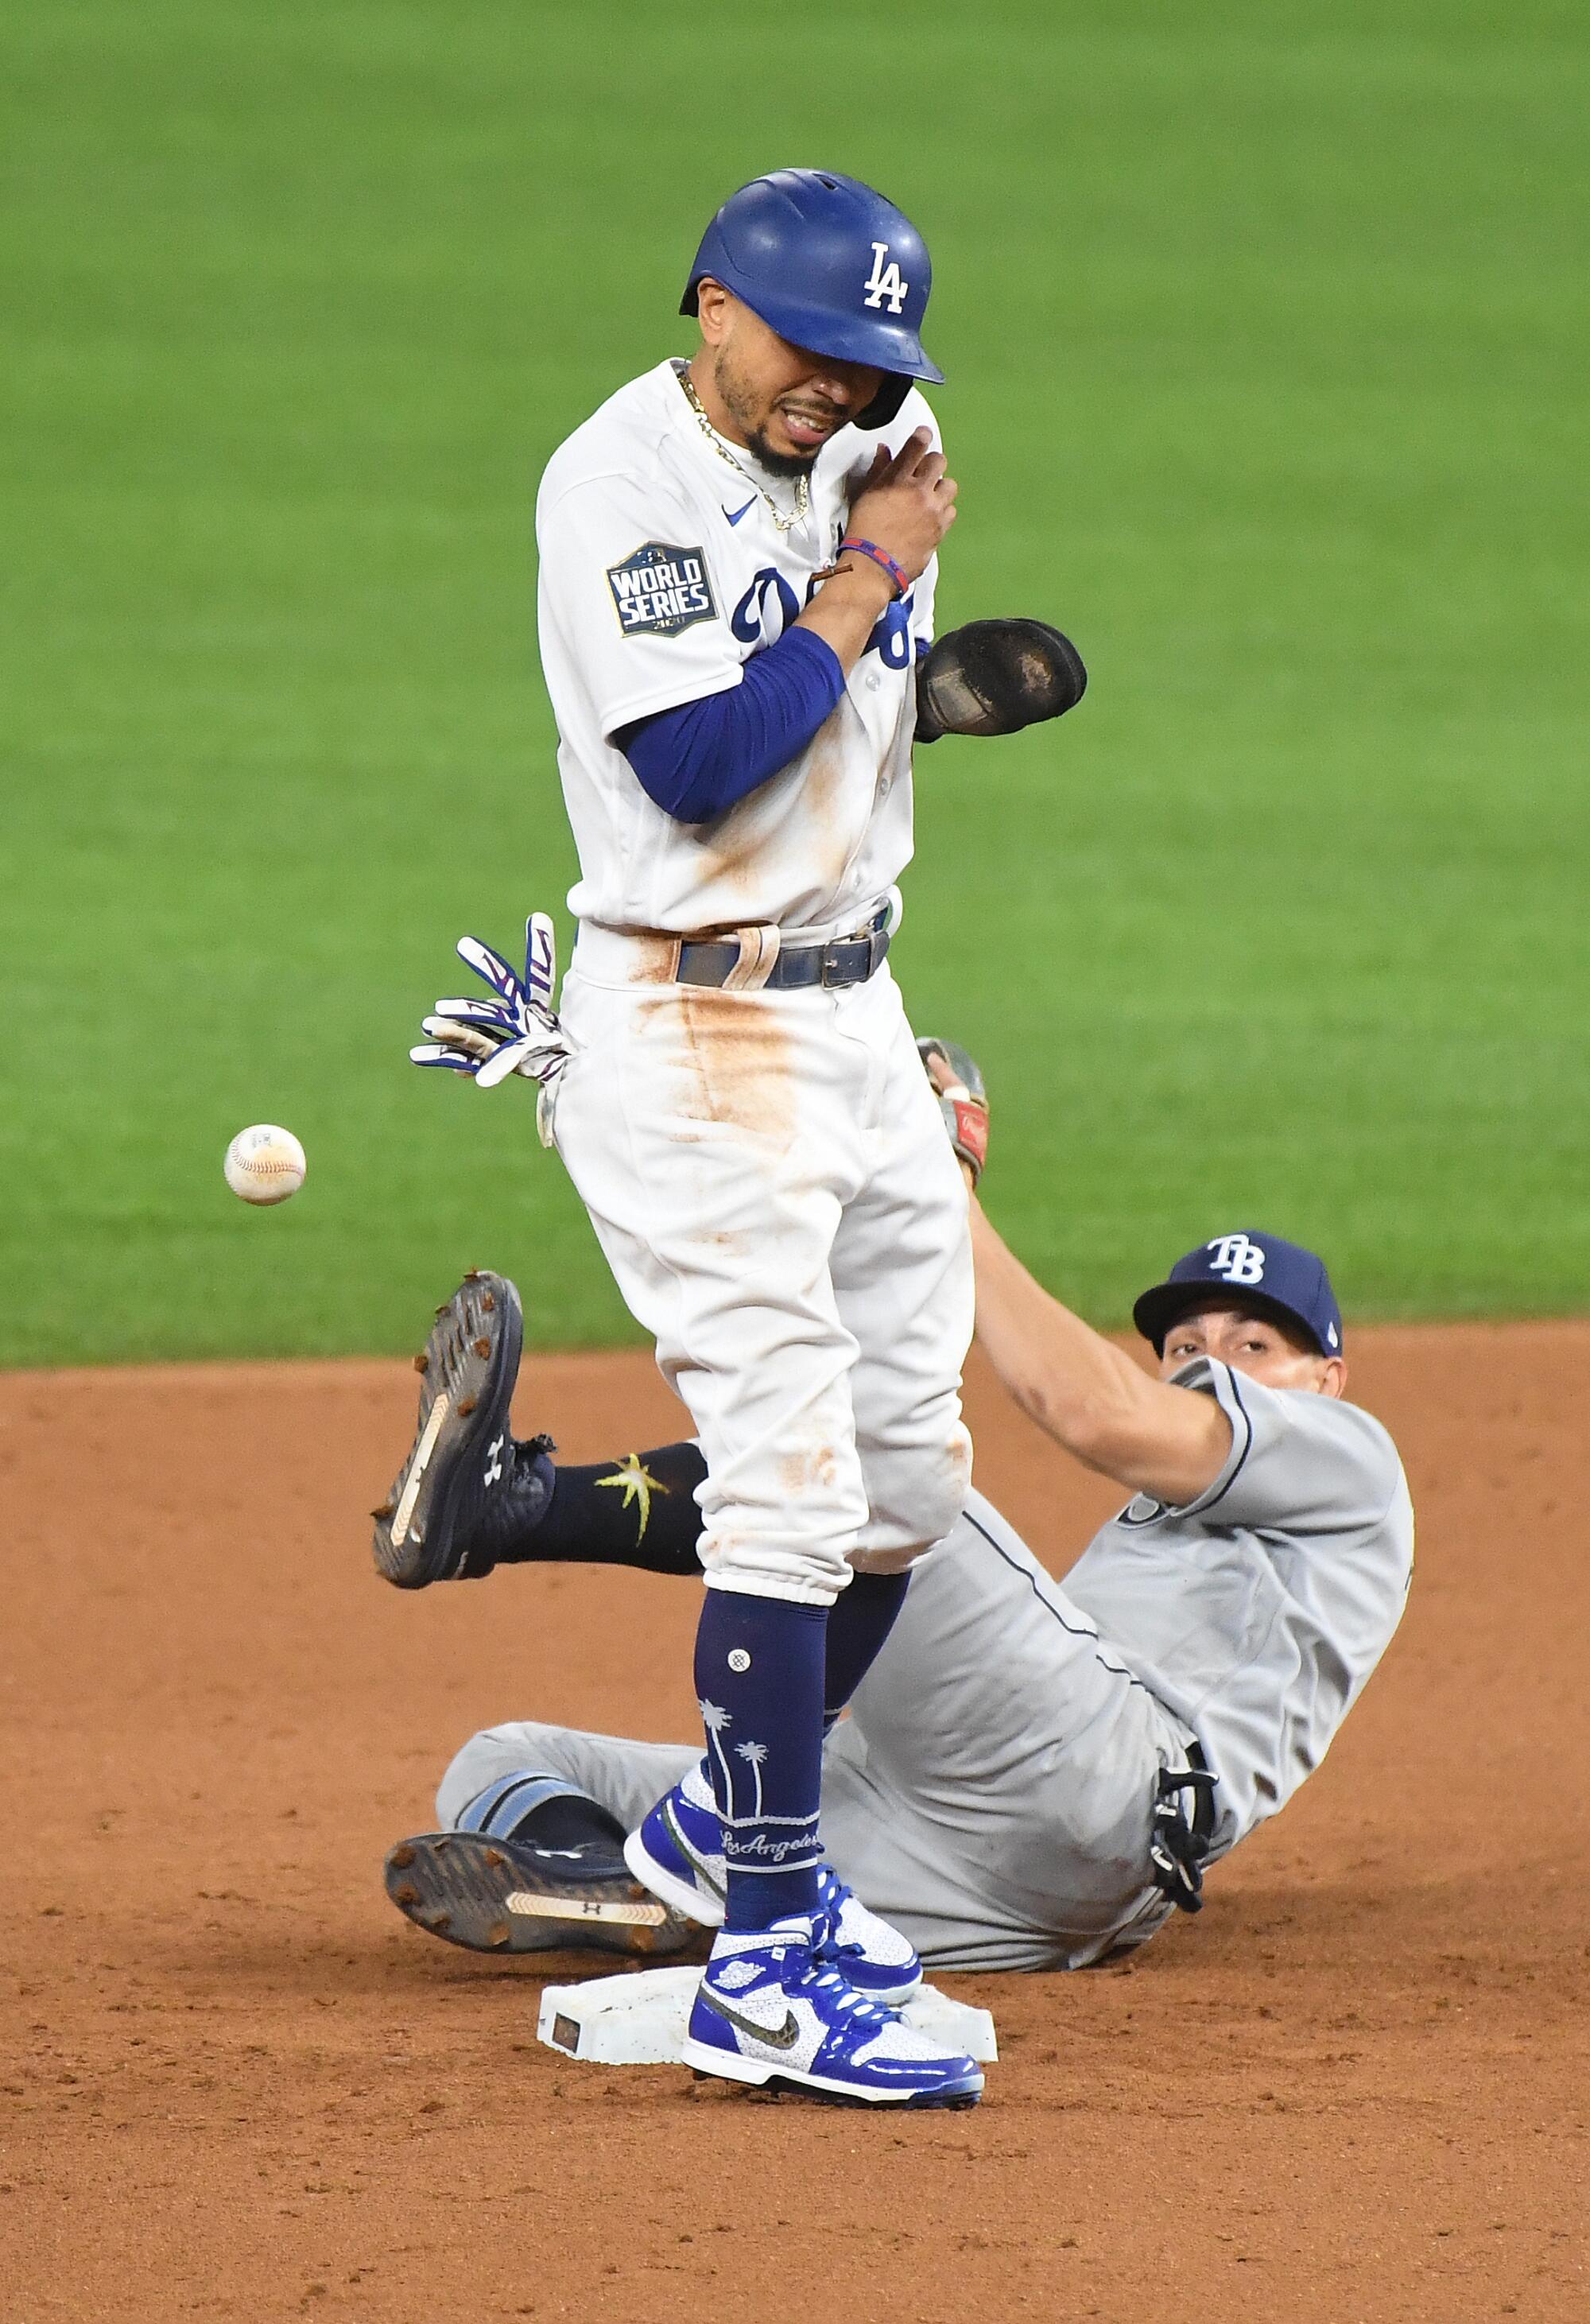 Dodgers baserunner Mookie Betts collides with Tampa Bay Rays shortstop Willy Adames after reaching second base.